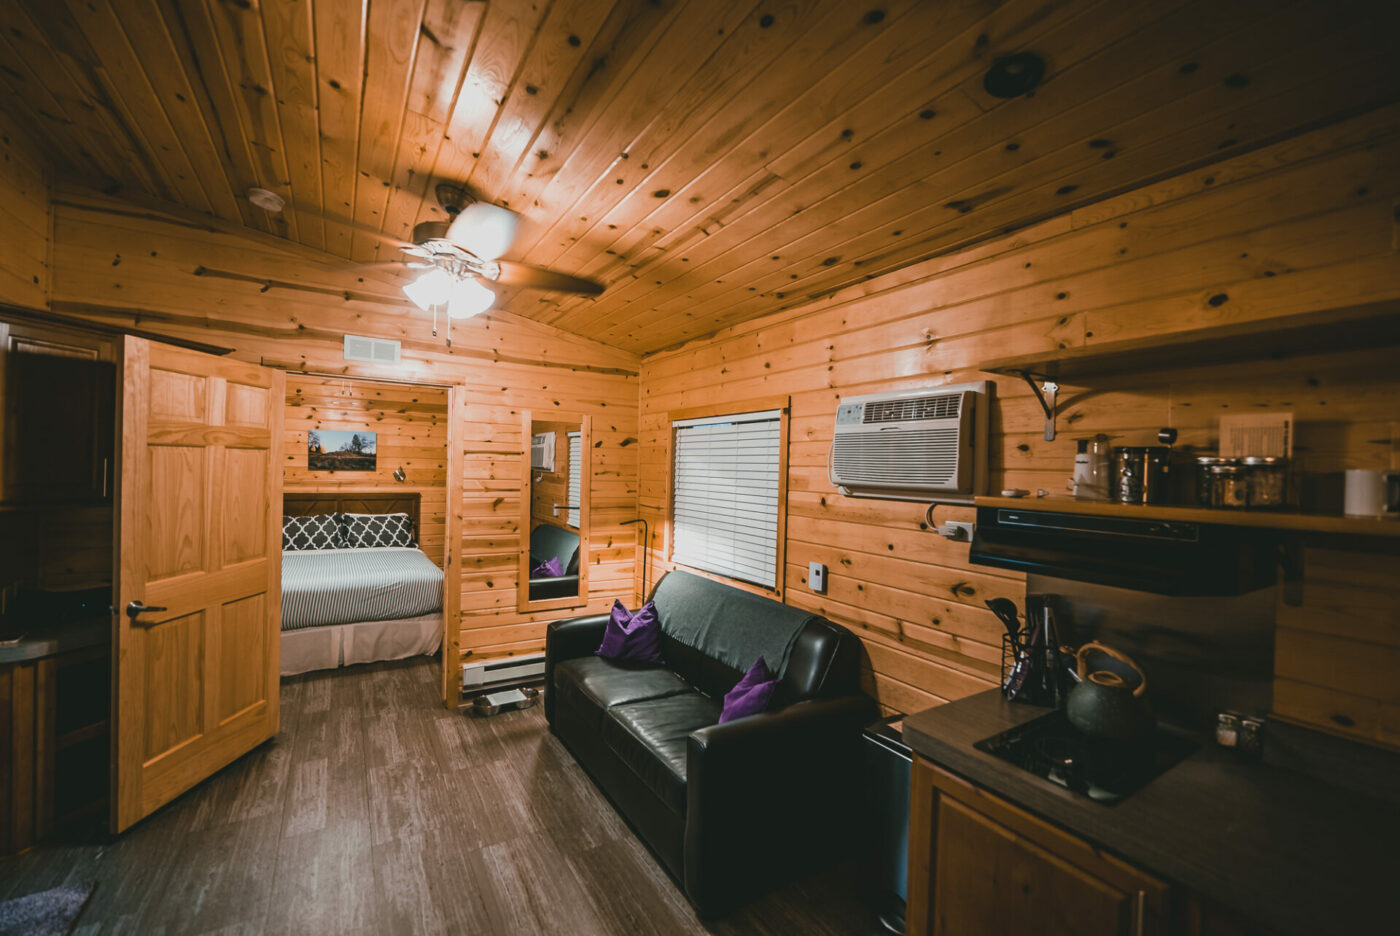 Inside our cabin at Sierra Meadows Glamping Resort